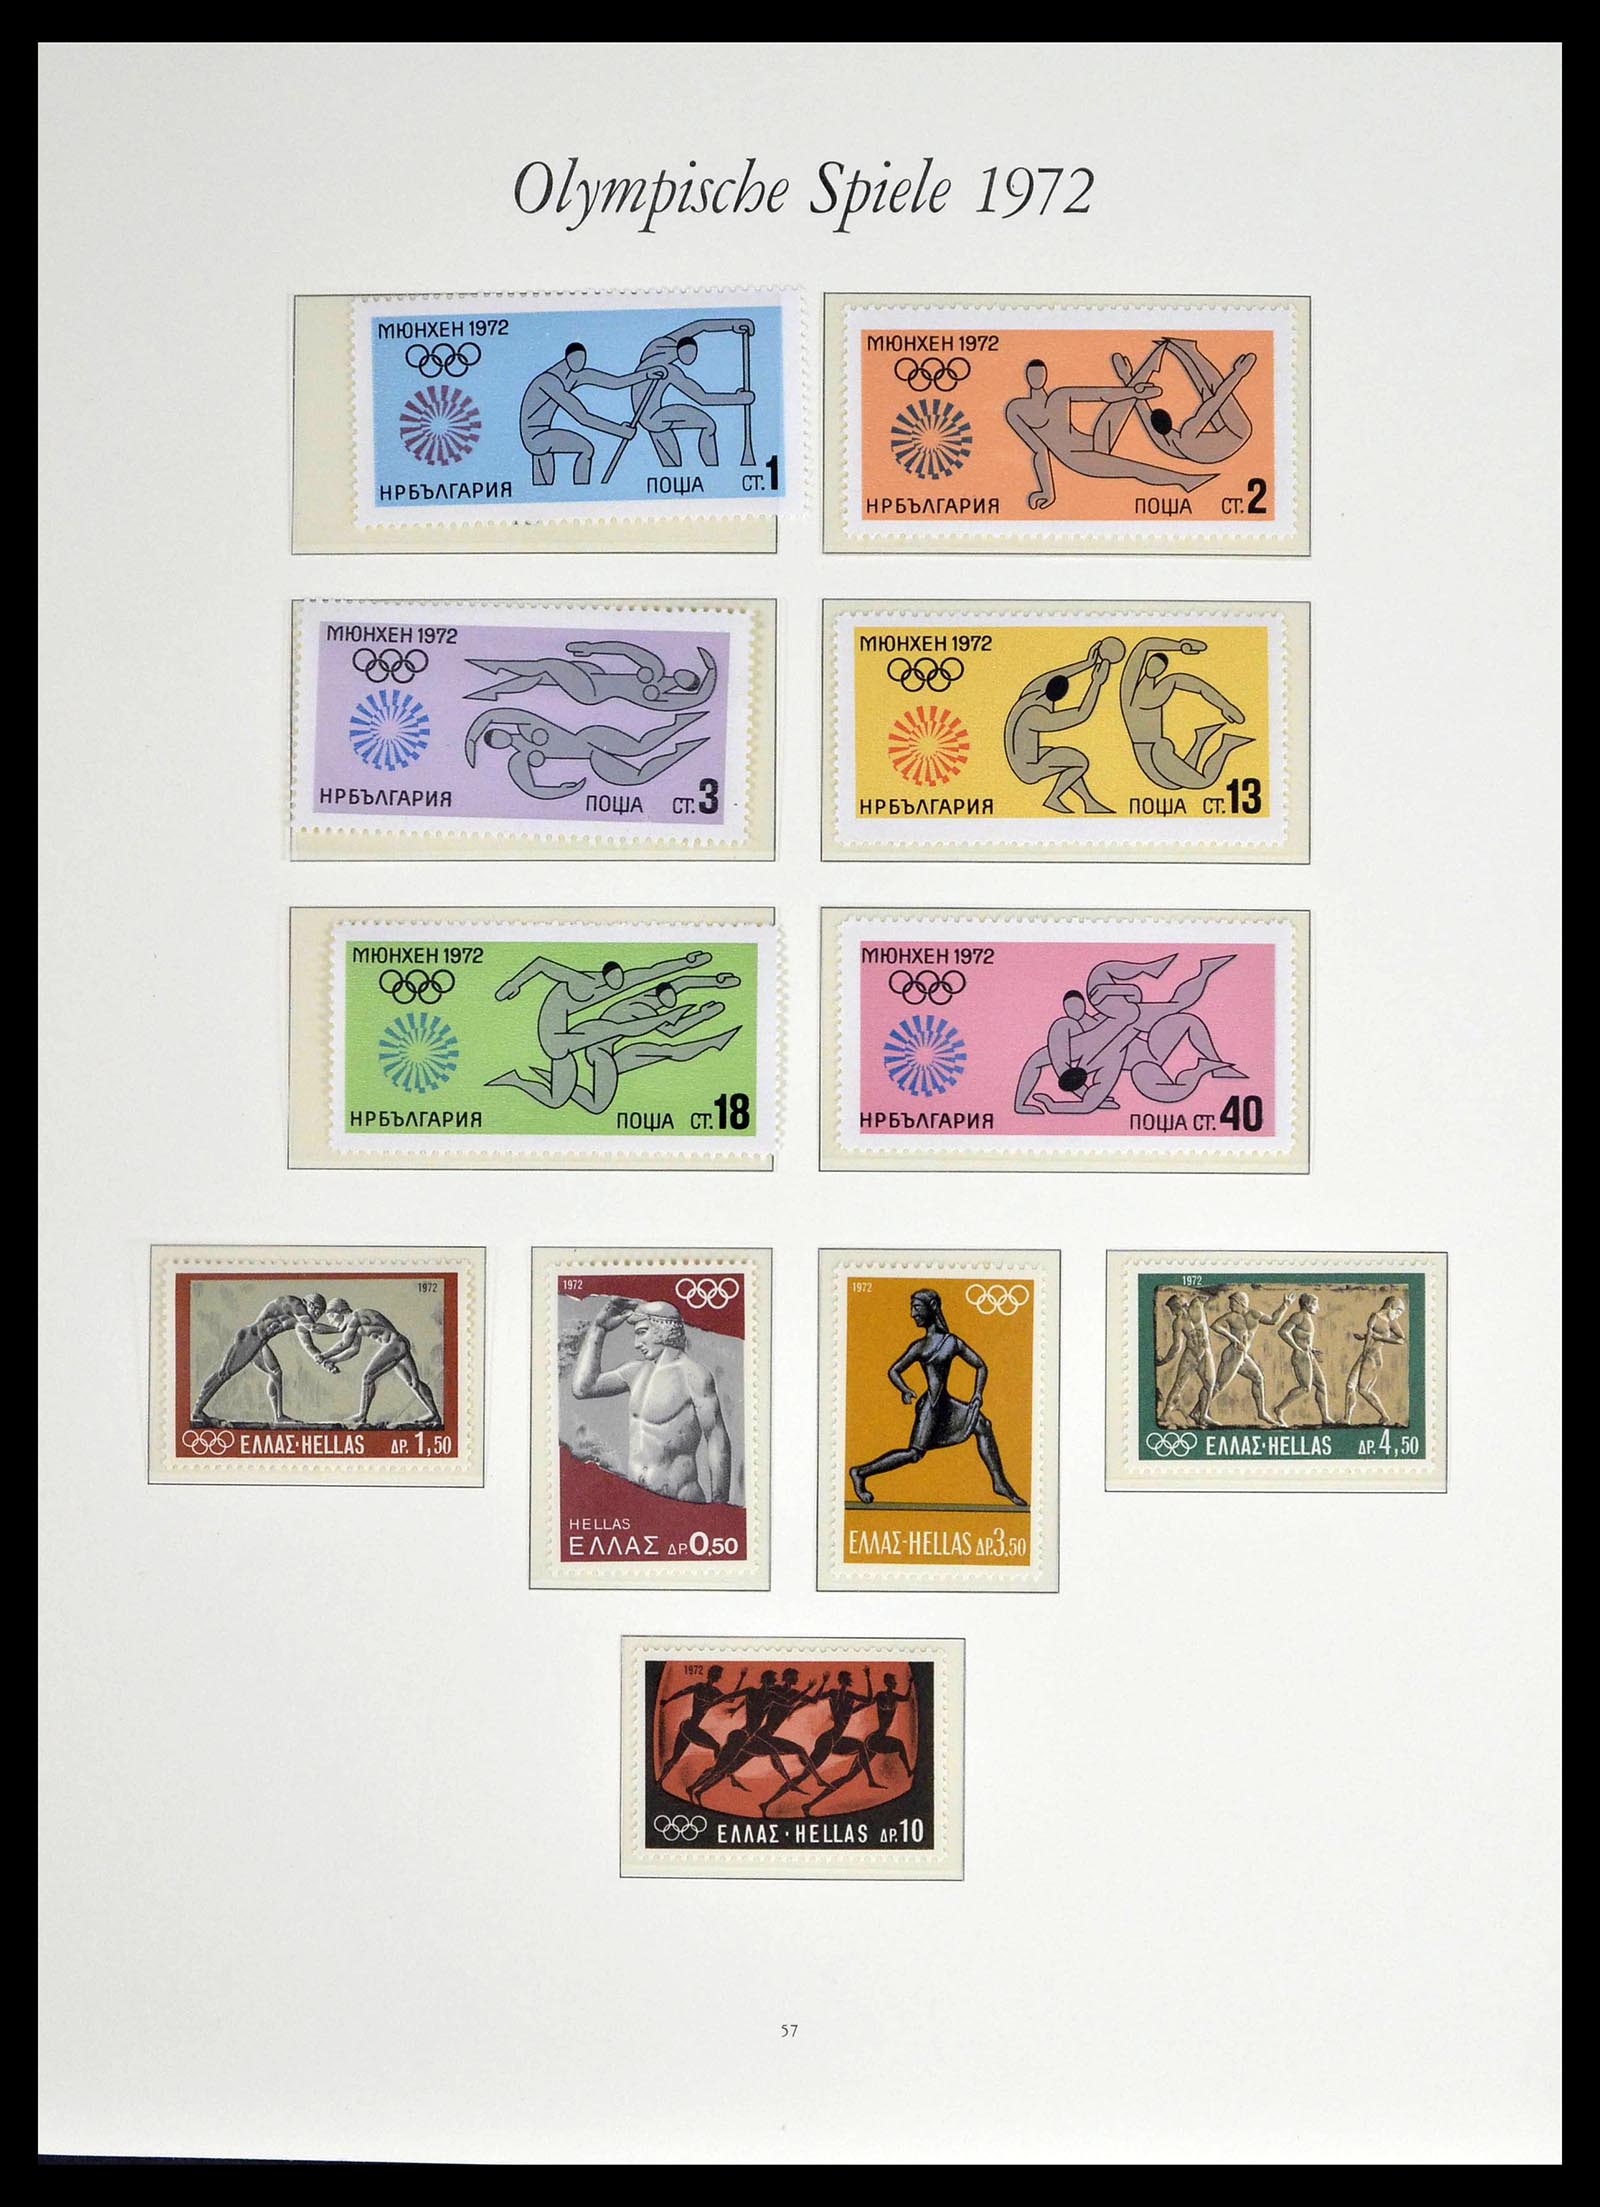 39237 0002 - Stamp collection 39237 Olympics 1972.